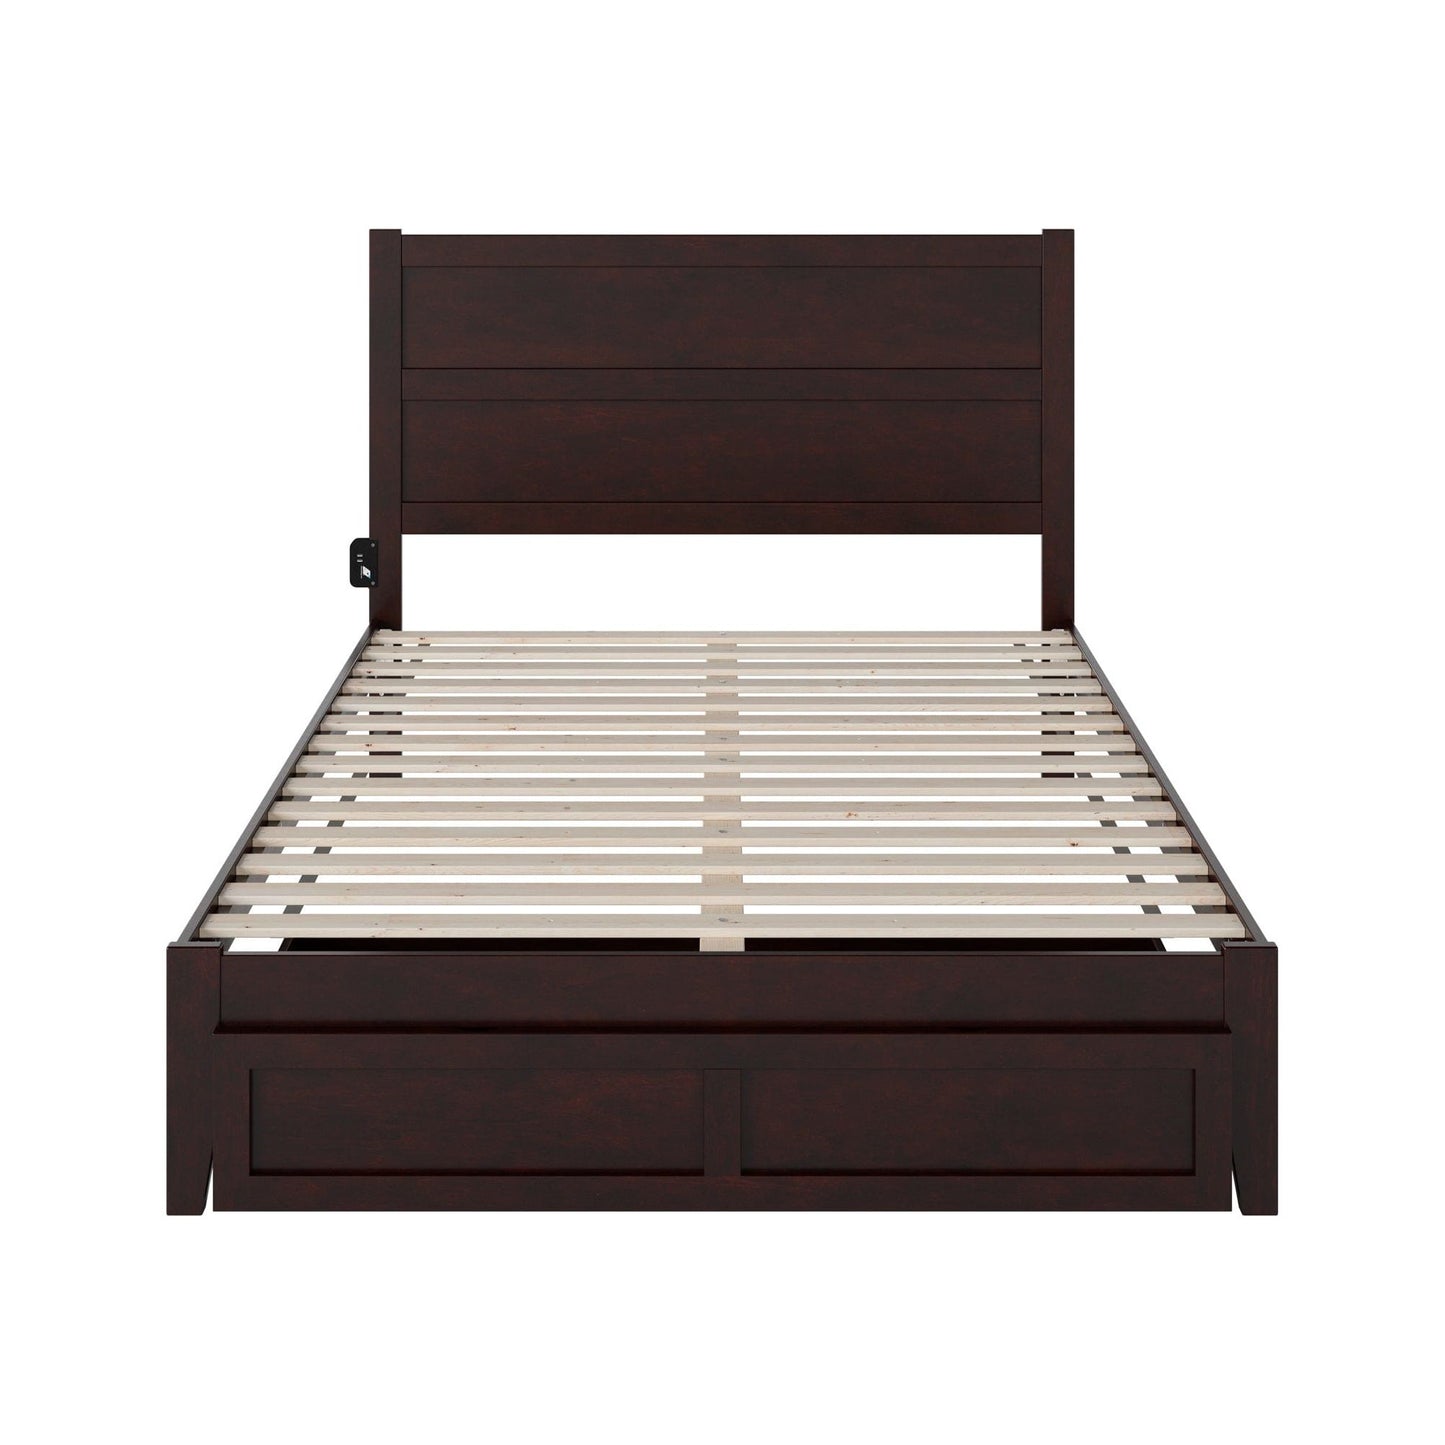 AFI Furnishings NoHo Queen Bed with Foot Drawer in Espresso